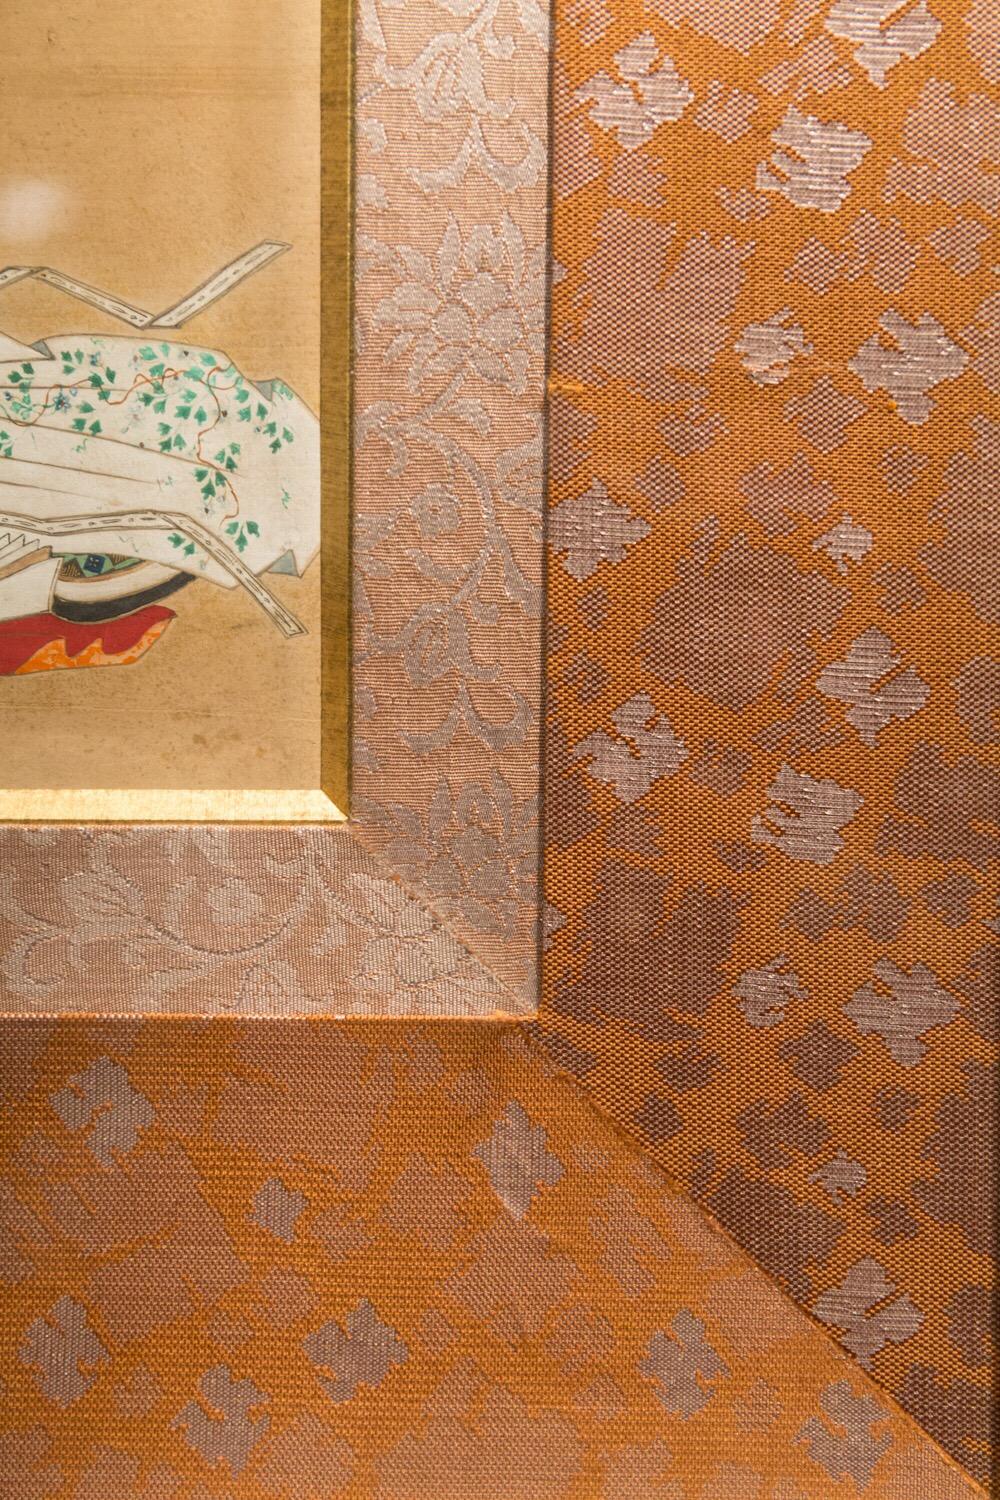 Gilt Edo Period Rectangular Ink on Paper and Gilded Frame Japanese Painting, 1780